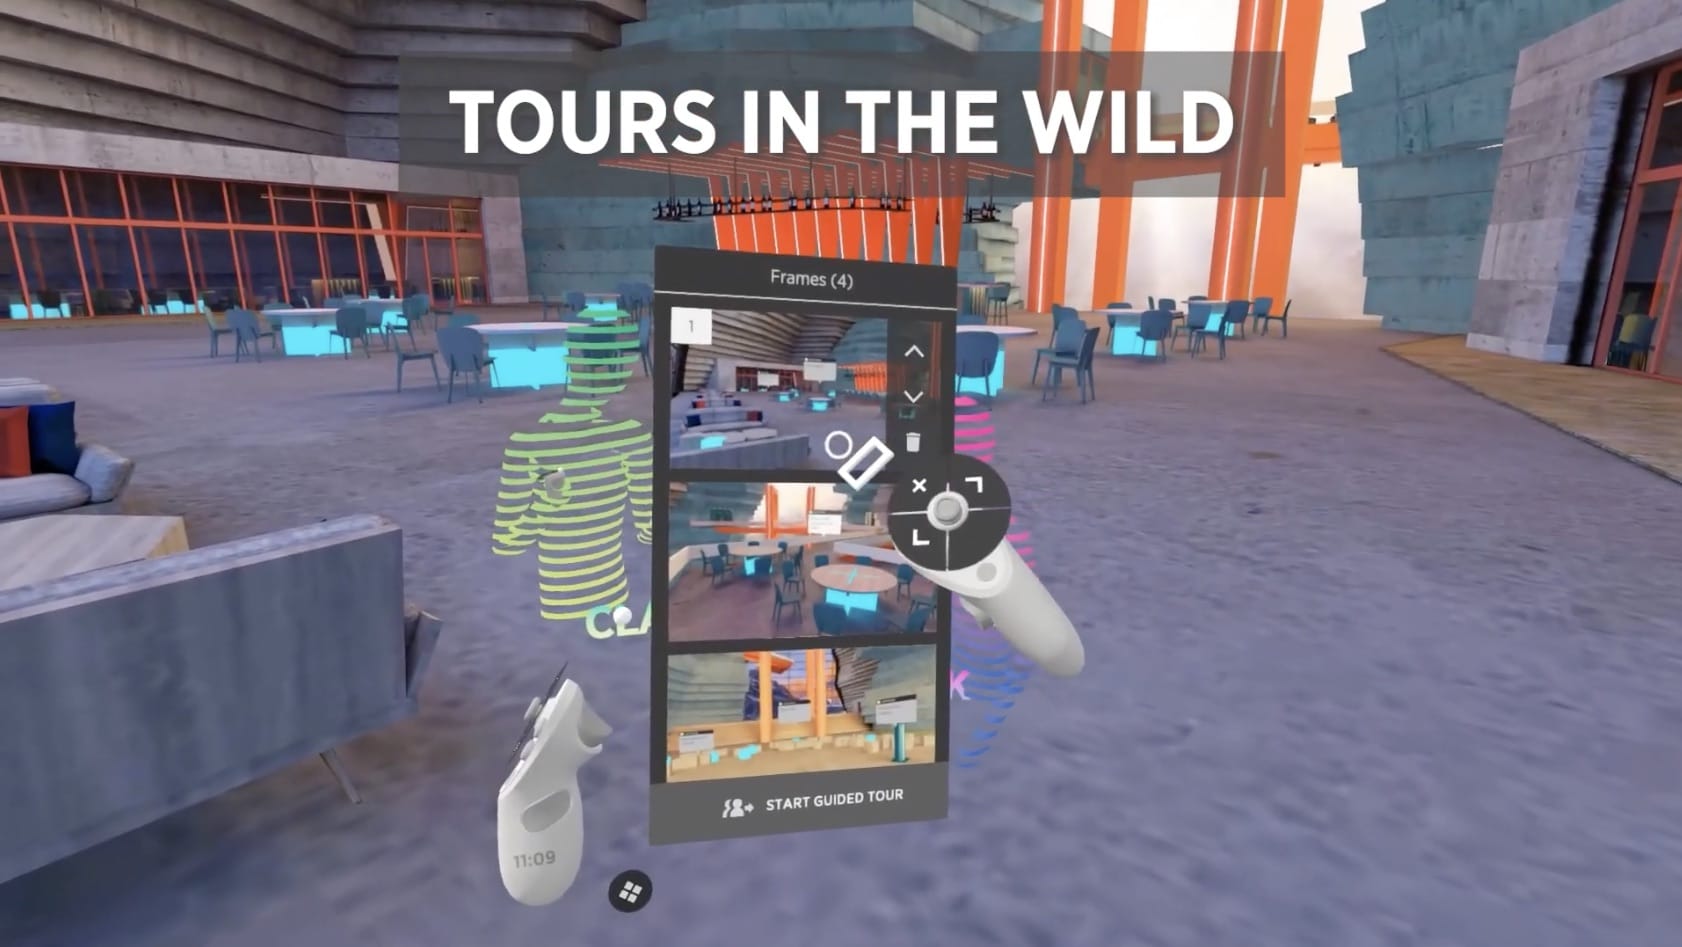 VR News: The Wild Launches New ‘Tours’ Feature